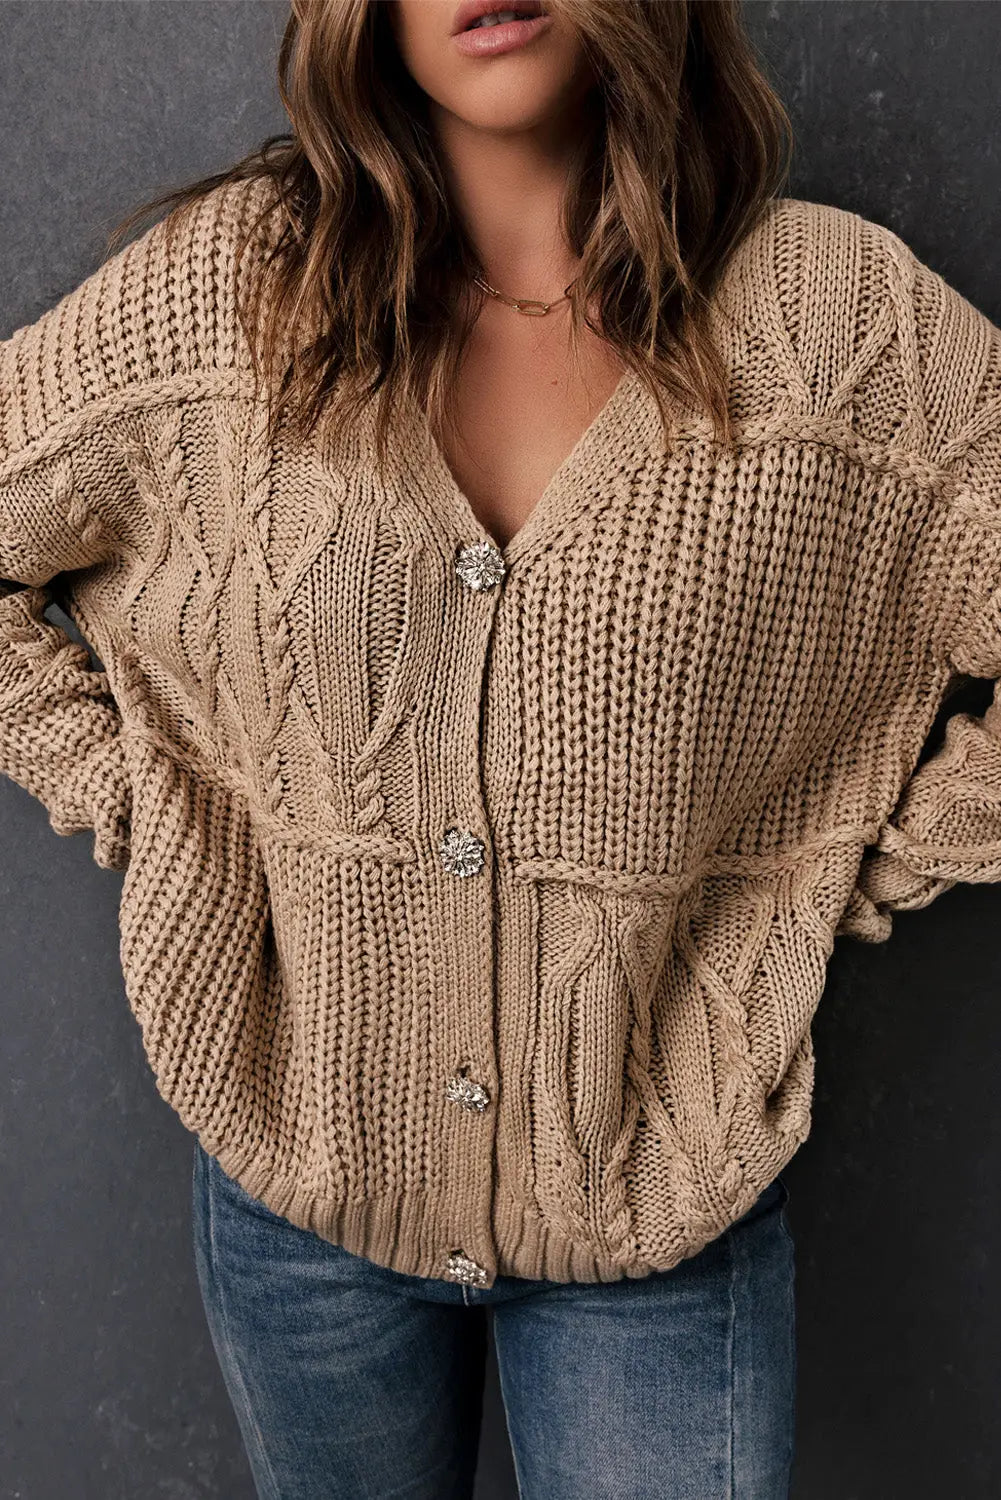 Apricot buttons front patterned texture knit cardigan - sweaters & cardigans